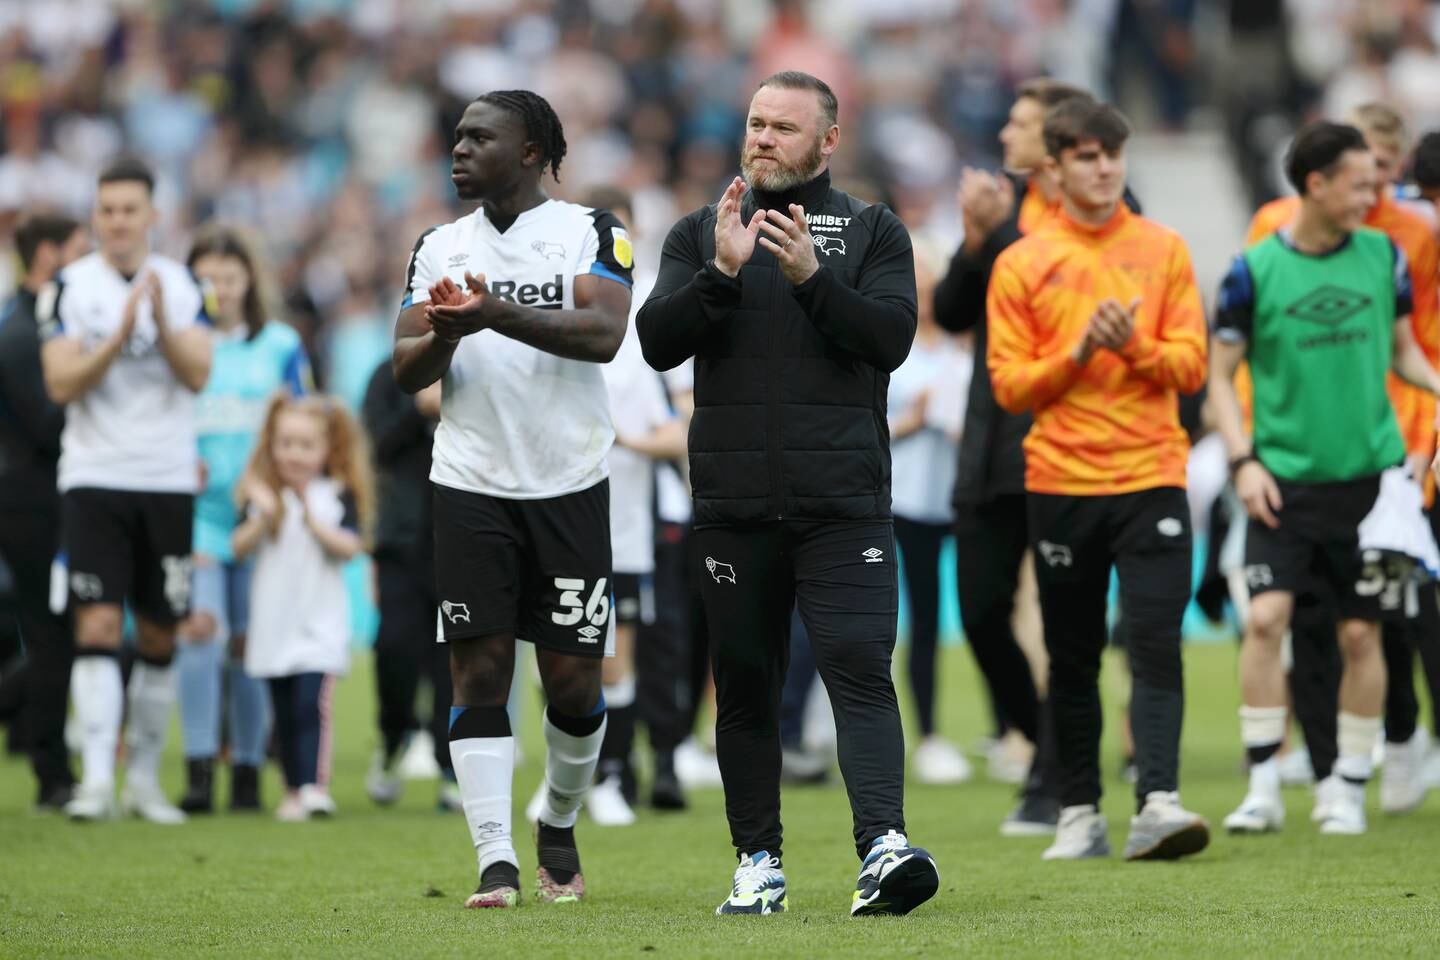 Wayne Rooney's spell as Derby County manager ended with the English club being relegated to the third tier after being deducted 21 points. Getty 